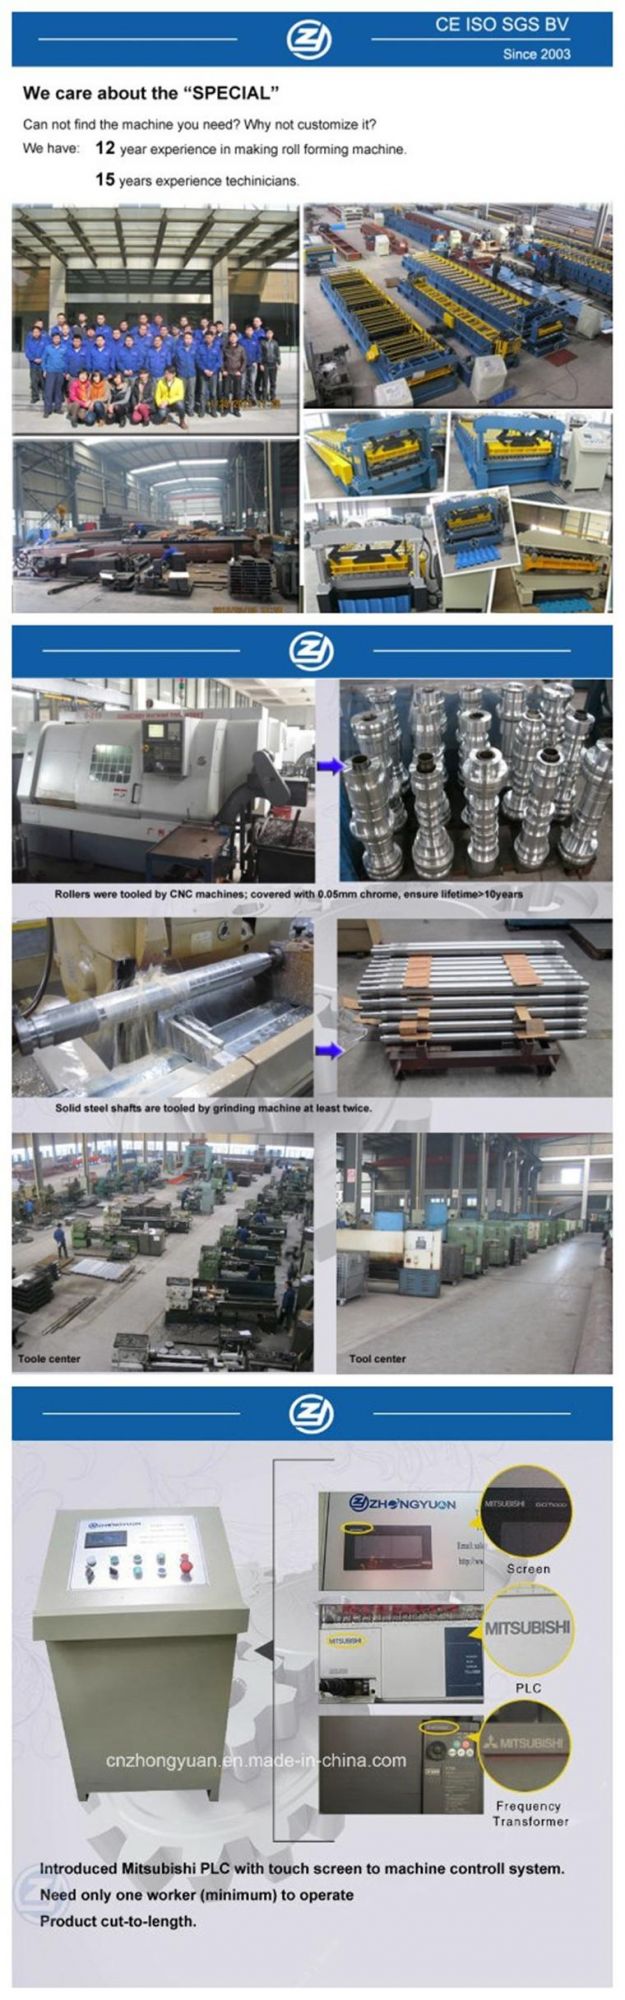 Hot Sale China Roll Former Manufacture Making Ibr Metal Steel Manual Roof Sheet Wall Panel Tile Cold Roll Forming Machine Prices Factory Price